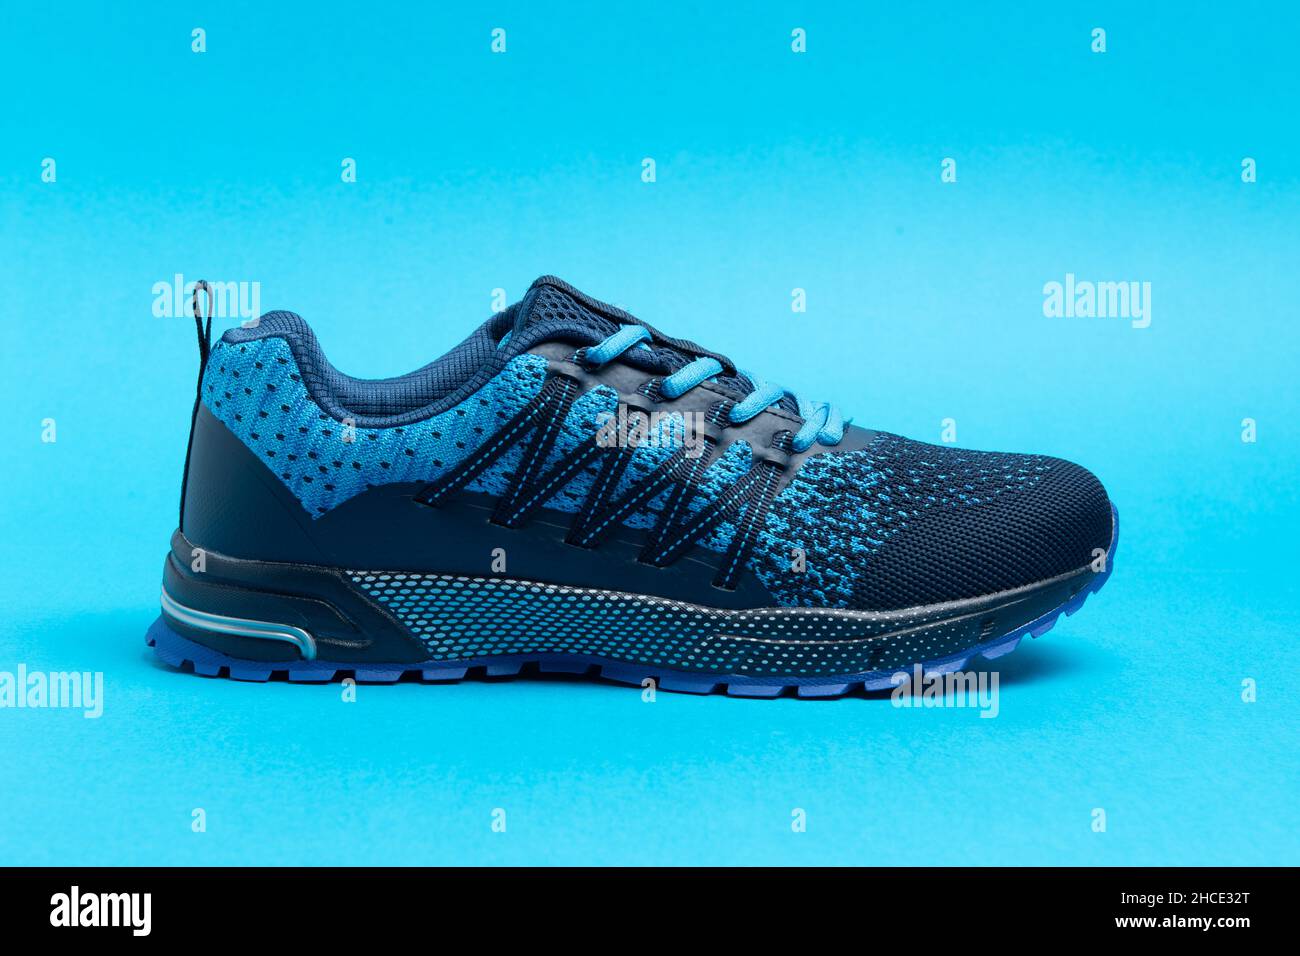 Blue sport shoe with colorful background. Running and podiatry concept. Stock Photo